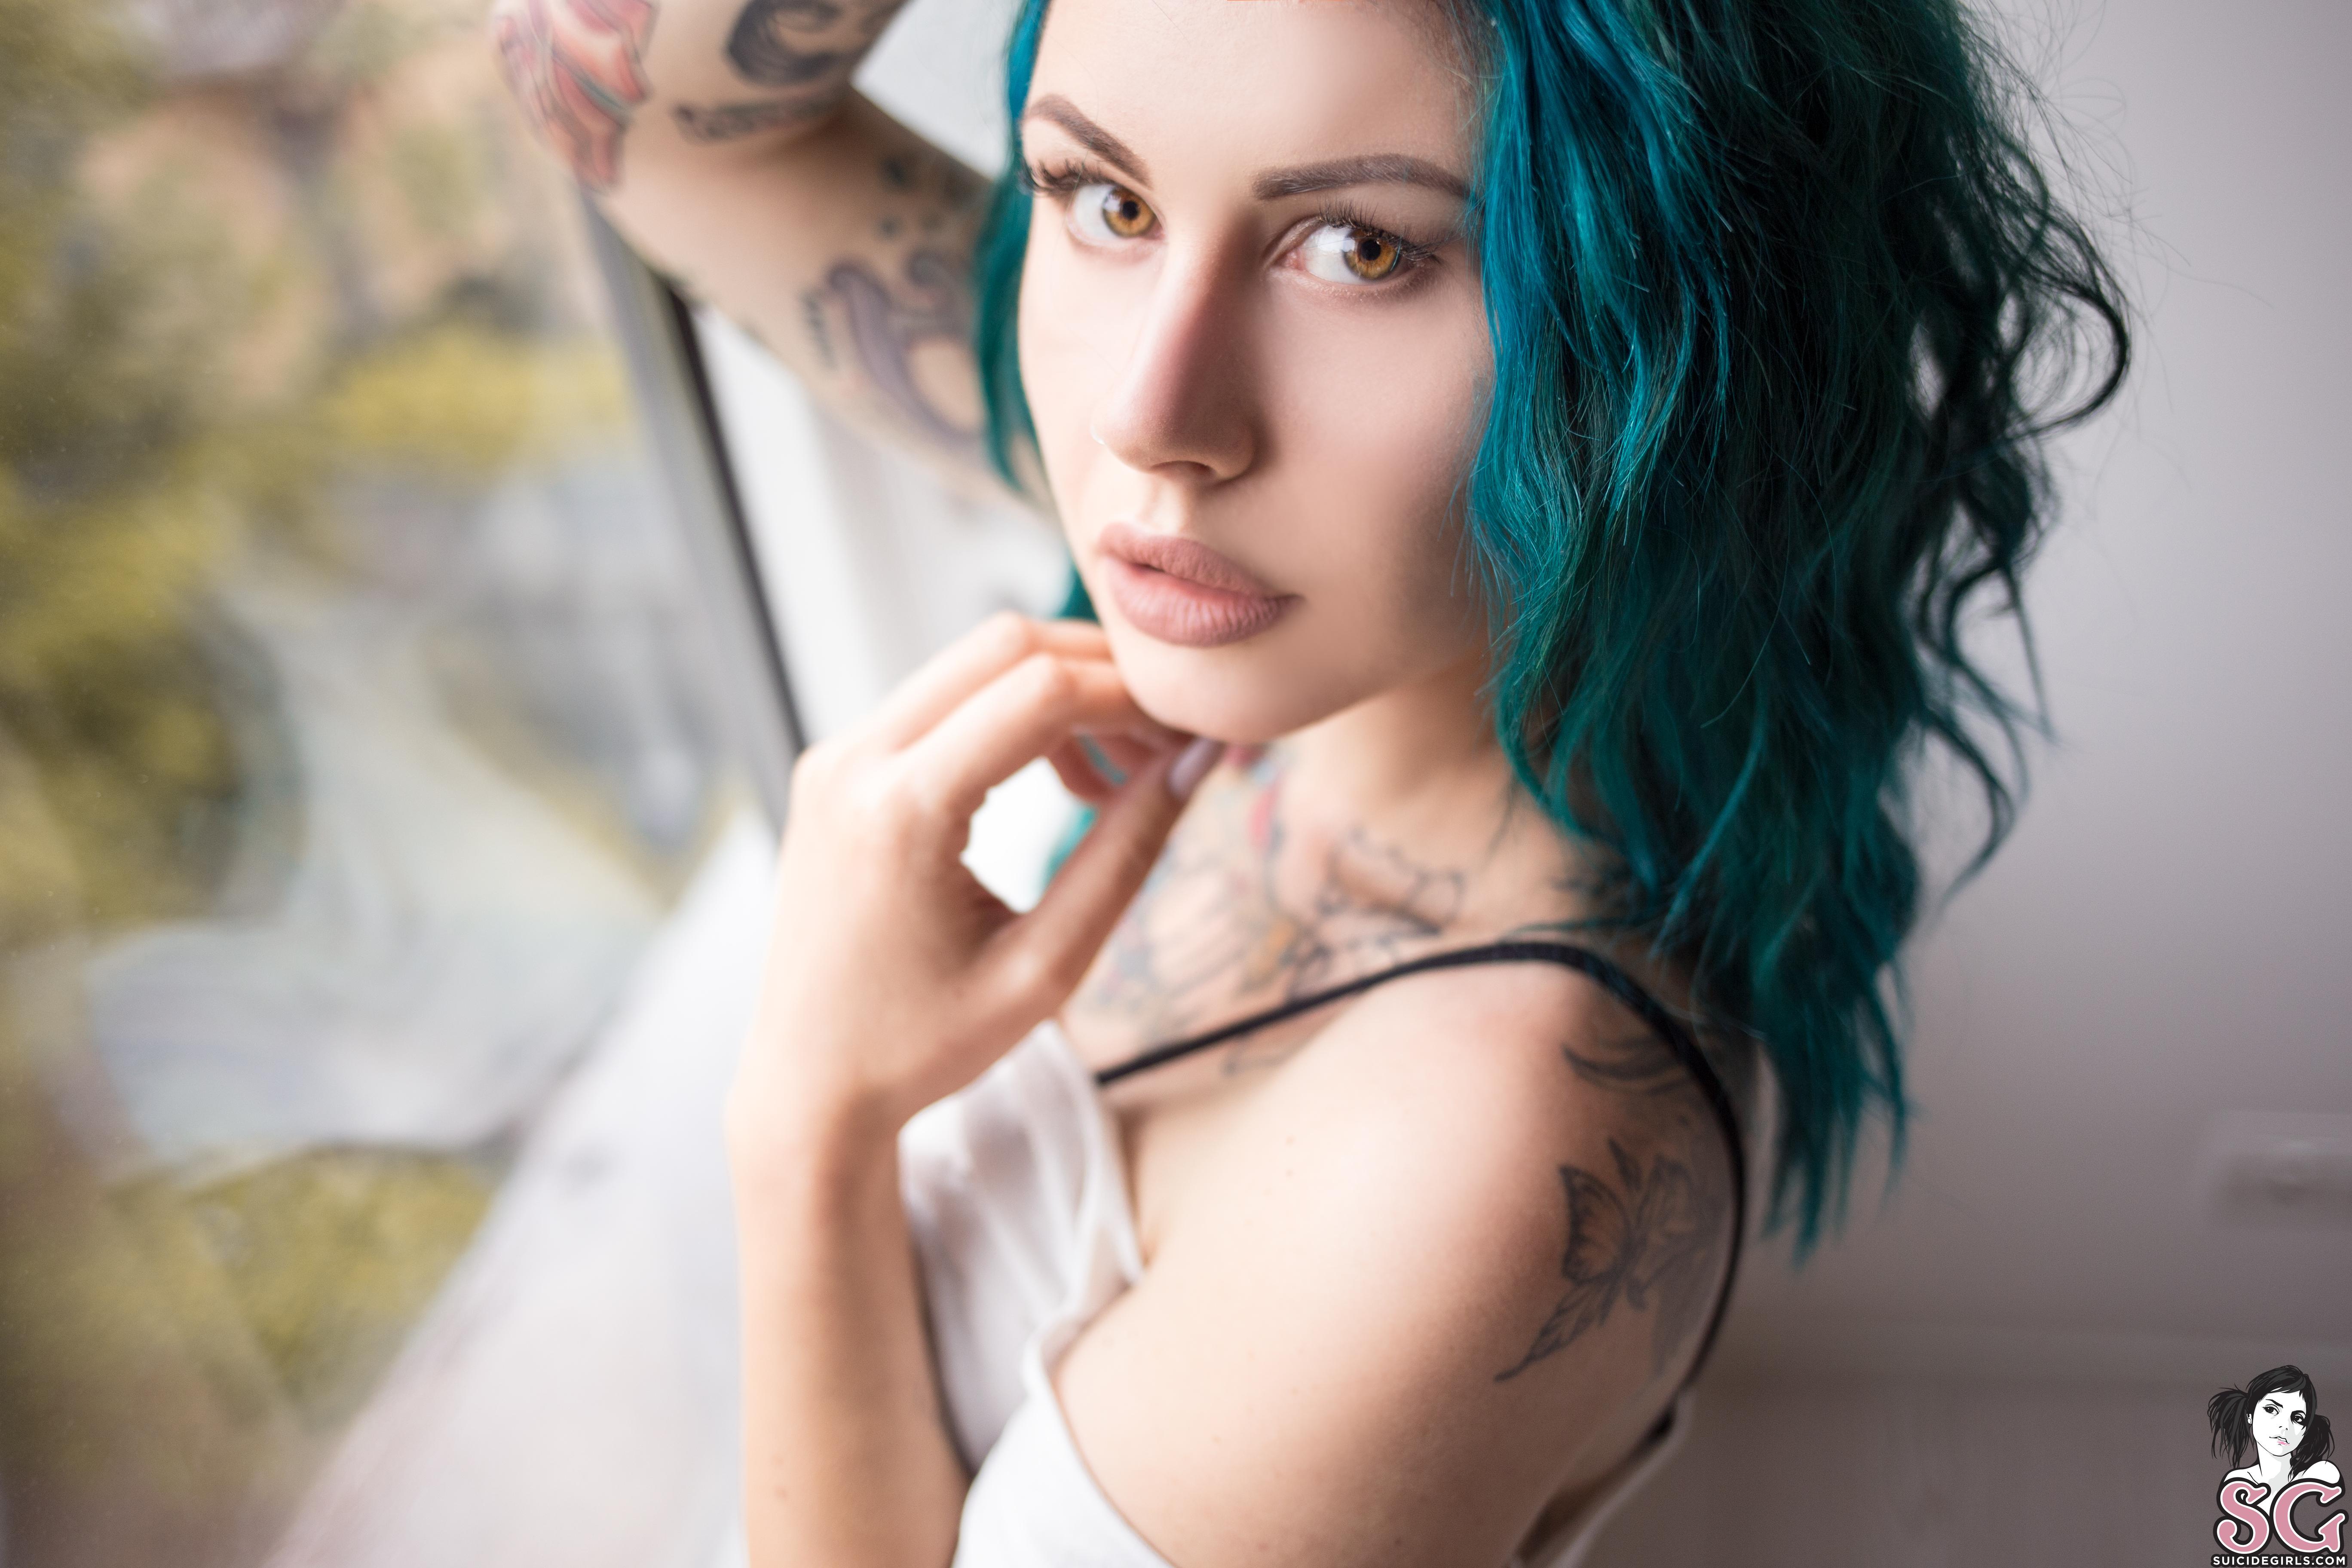 Cam model with blue hair and perfect tits - wide 7